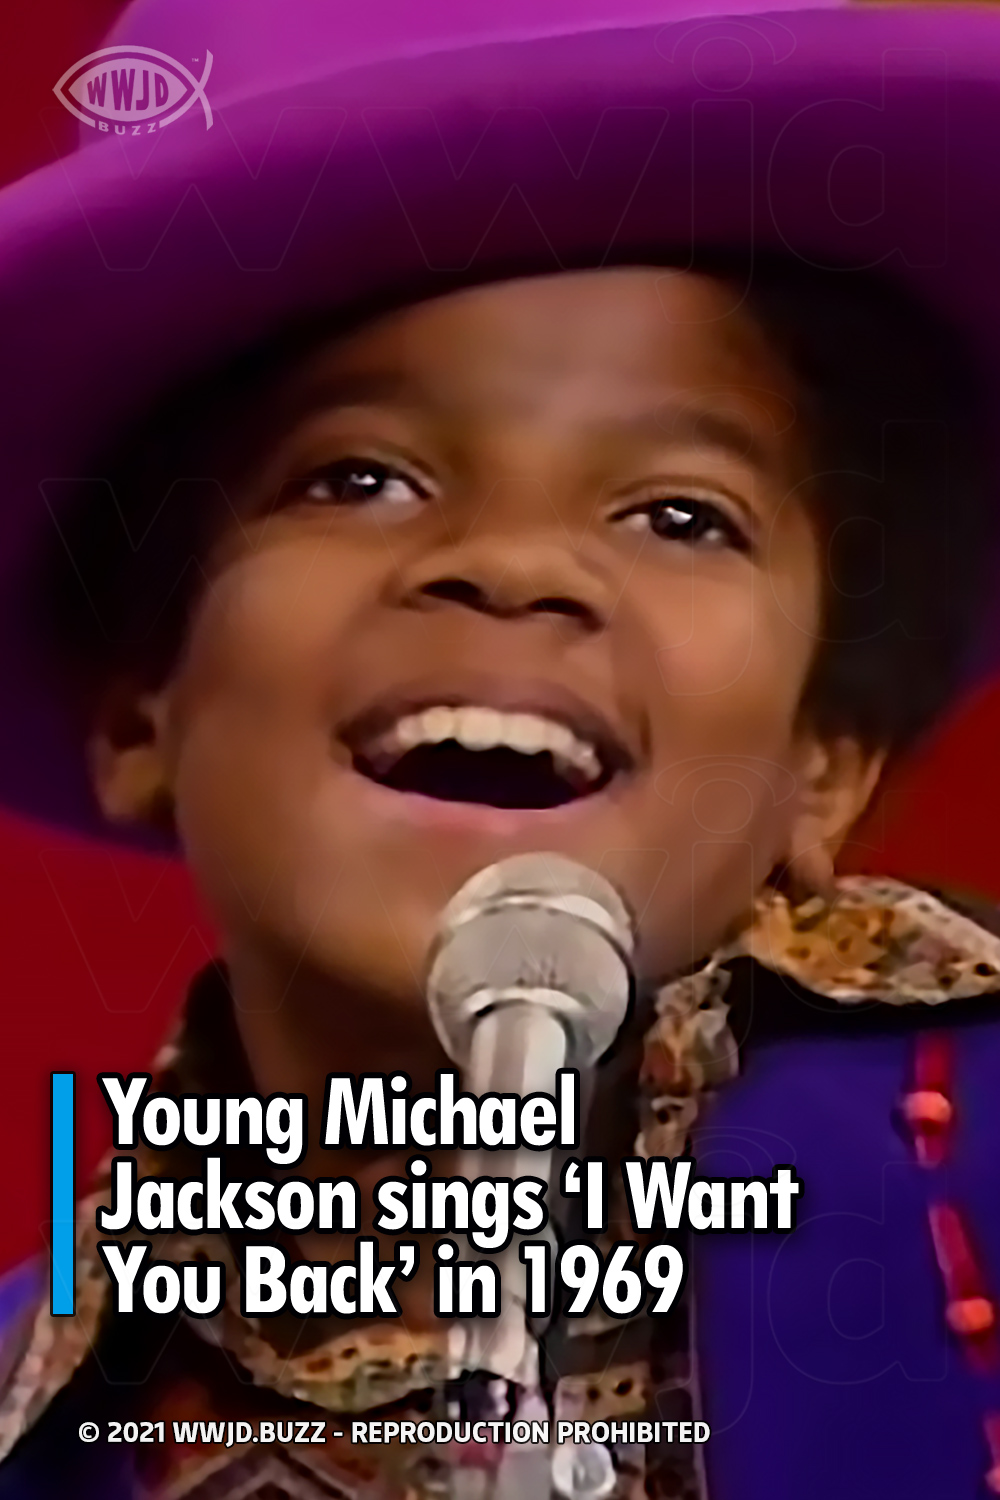 Young Michael Jackson sings ‘I Want You Back’ in 1969